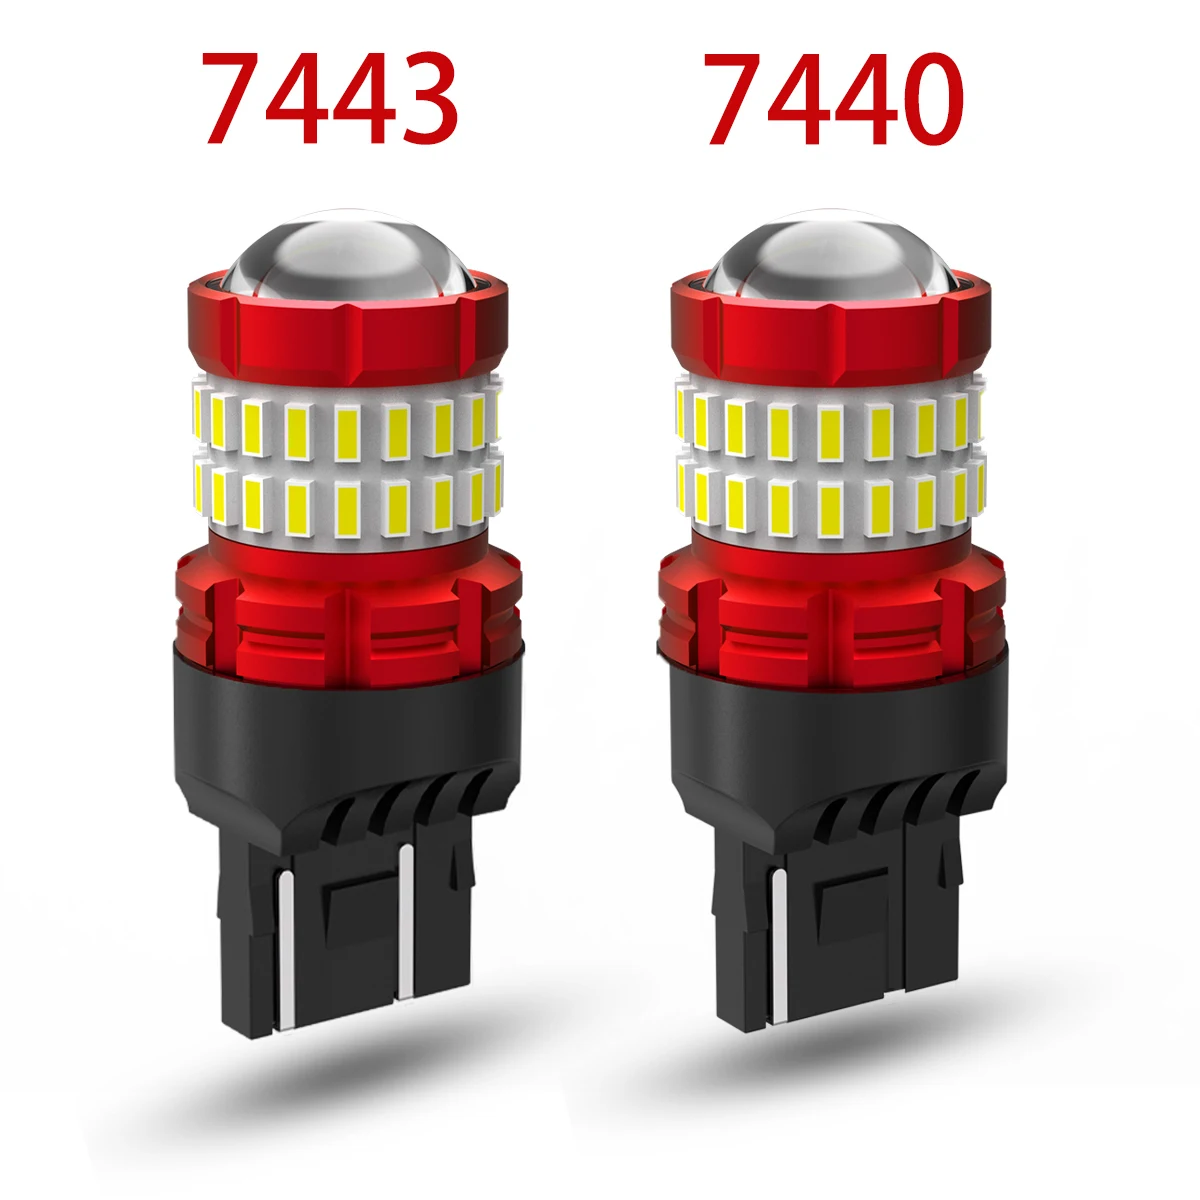 BMTxms 2pcs T20 W21W W21/5W LED 7440 7443 LED Canbus Bulbs Auto Red Brilliant Replacement Brake Tail Parking Light Car Lamps 12V images - 6